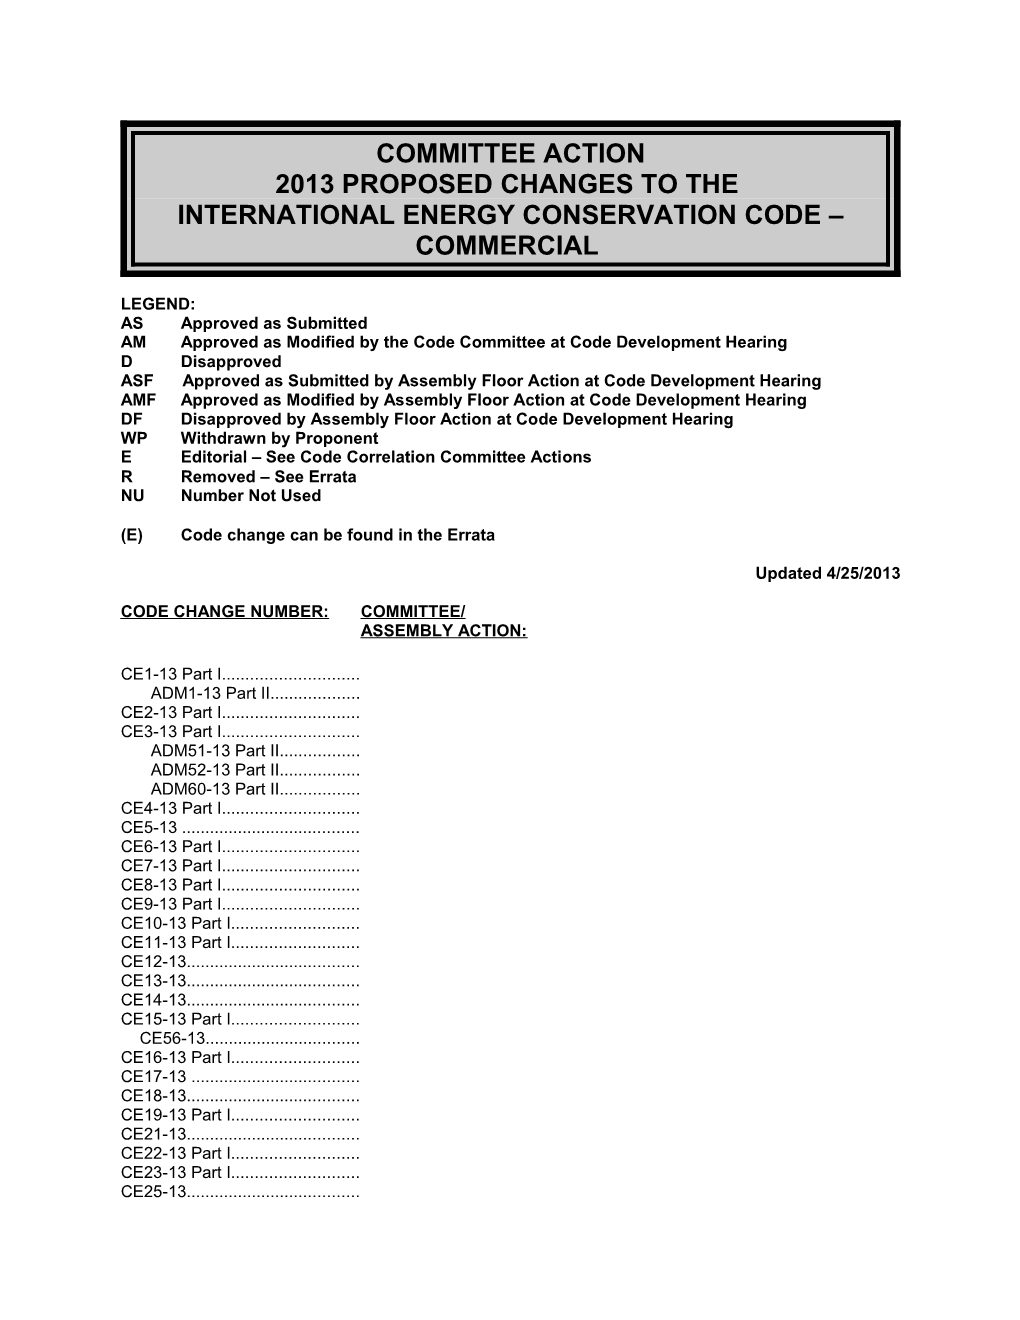 IECC - International Energy Conservation Code - Commercial - Hearing Order (REVISED: 4-25-13)